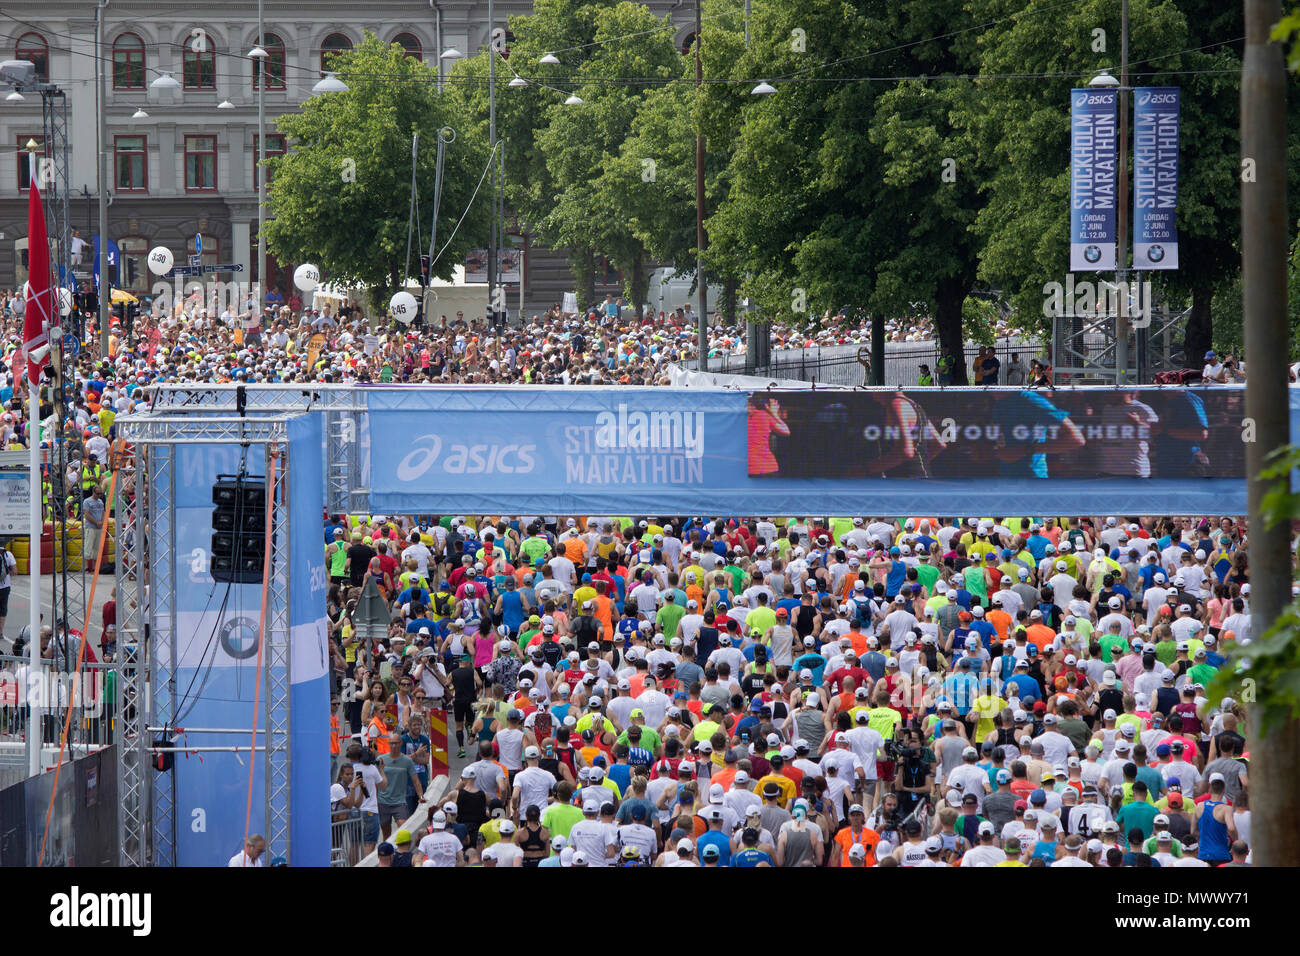 ASICS Stockholm (STHLM) Marathon 2018. Thousands of runners at Stadion area, leave starting point, heading to Valhallavägen street to continue their race course. Stockholm, Sweden. 2nd June 2018. Credit: BasilT/Alamy Live News Stock Photo